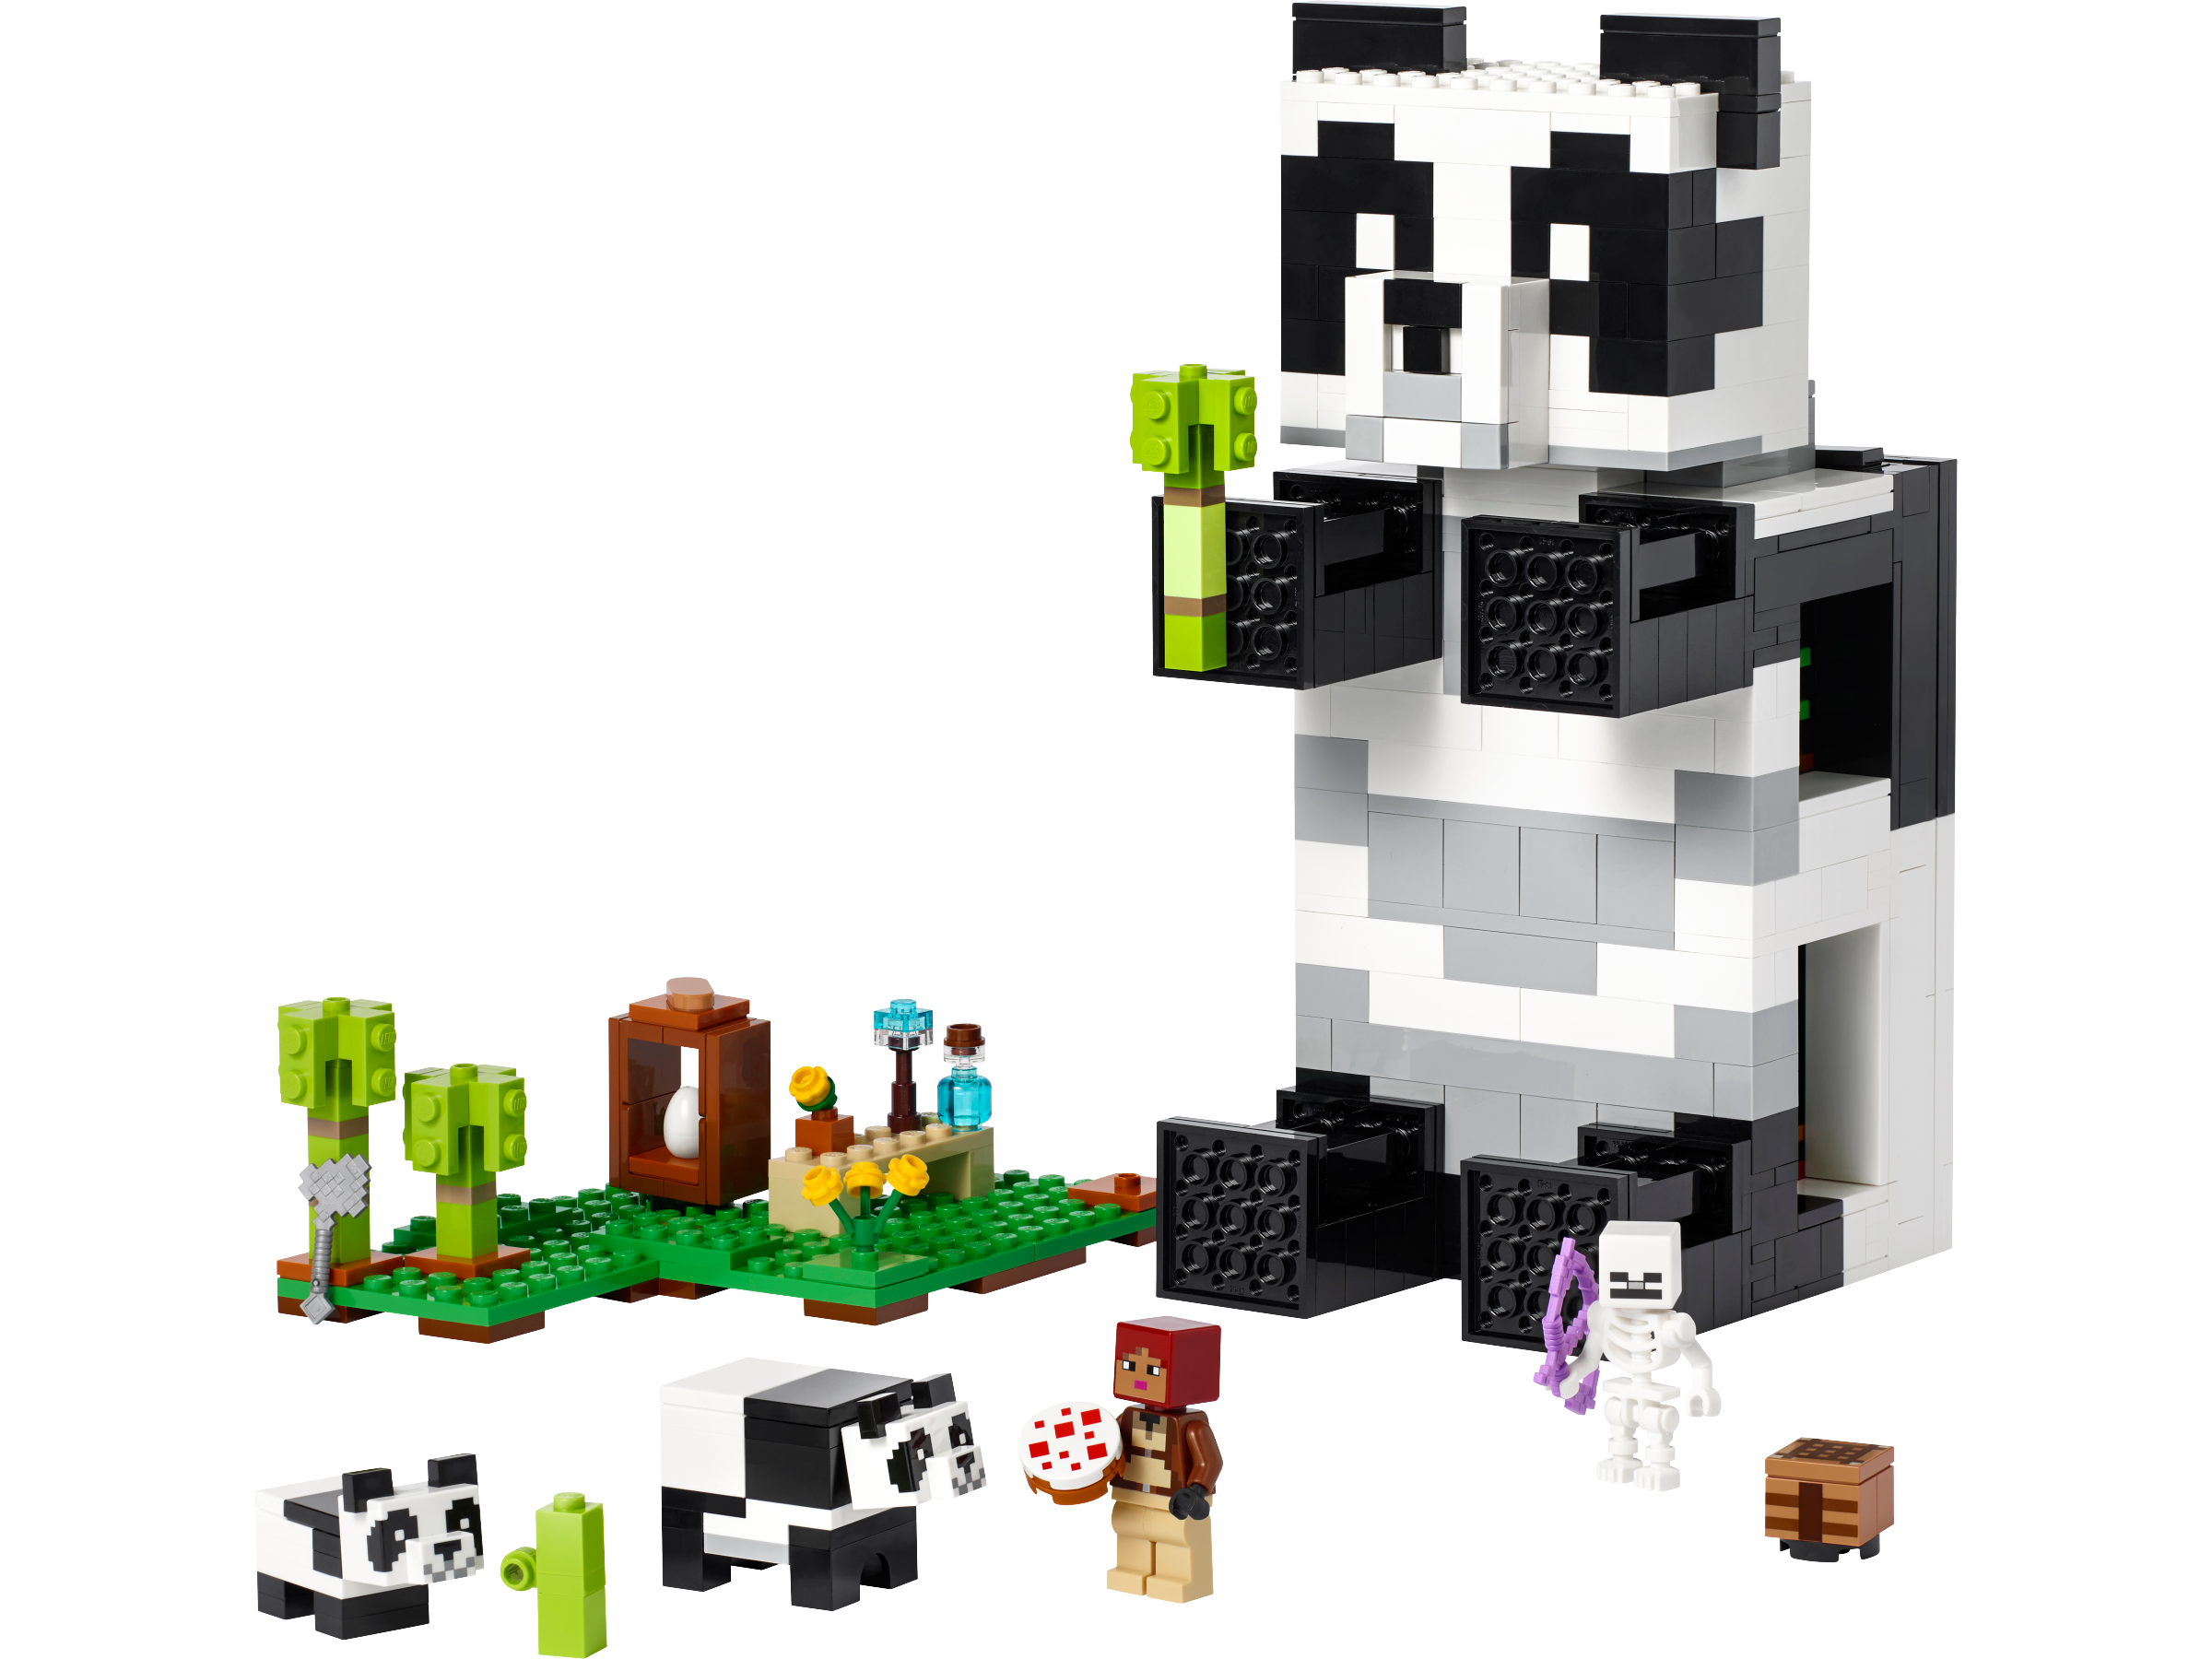 LEGO Minecraft The End Arena, Ender Dragon Battle Set 21242, Multiplayer  Set Includes Mobs, Shulker and Enderman, Minecraft Gift and Educational